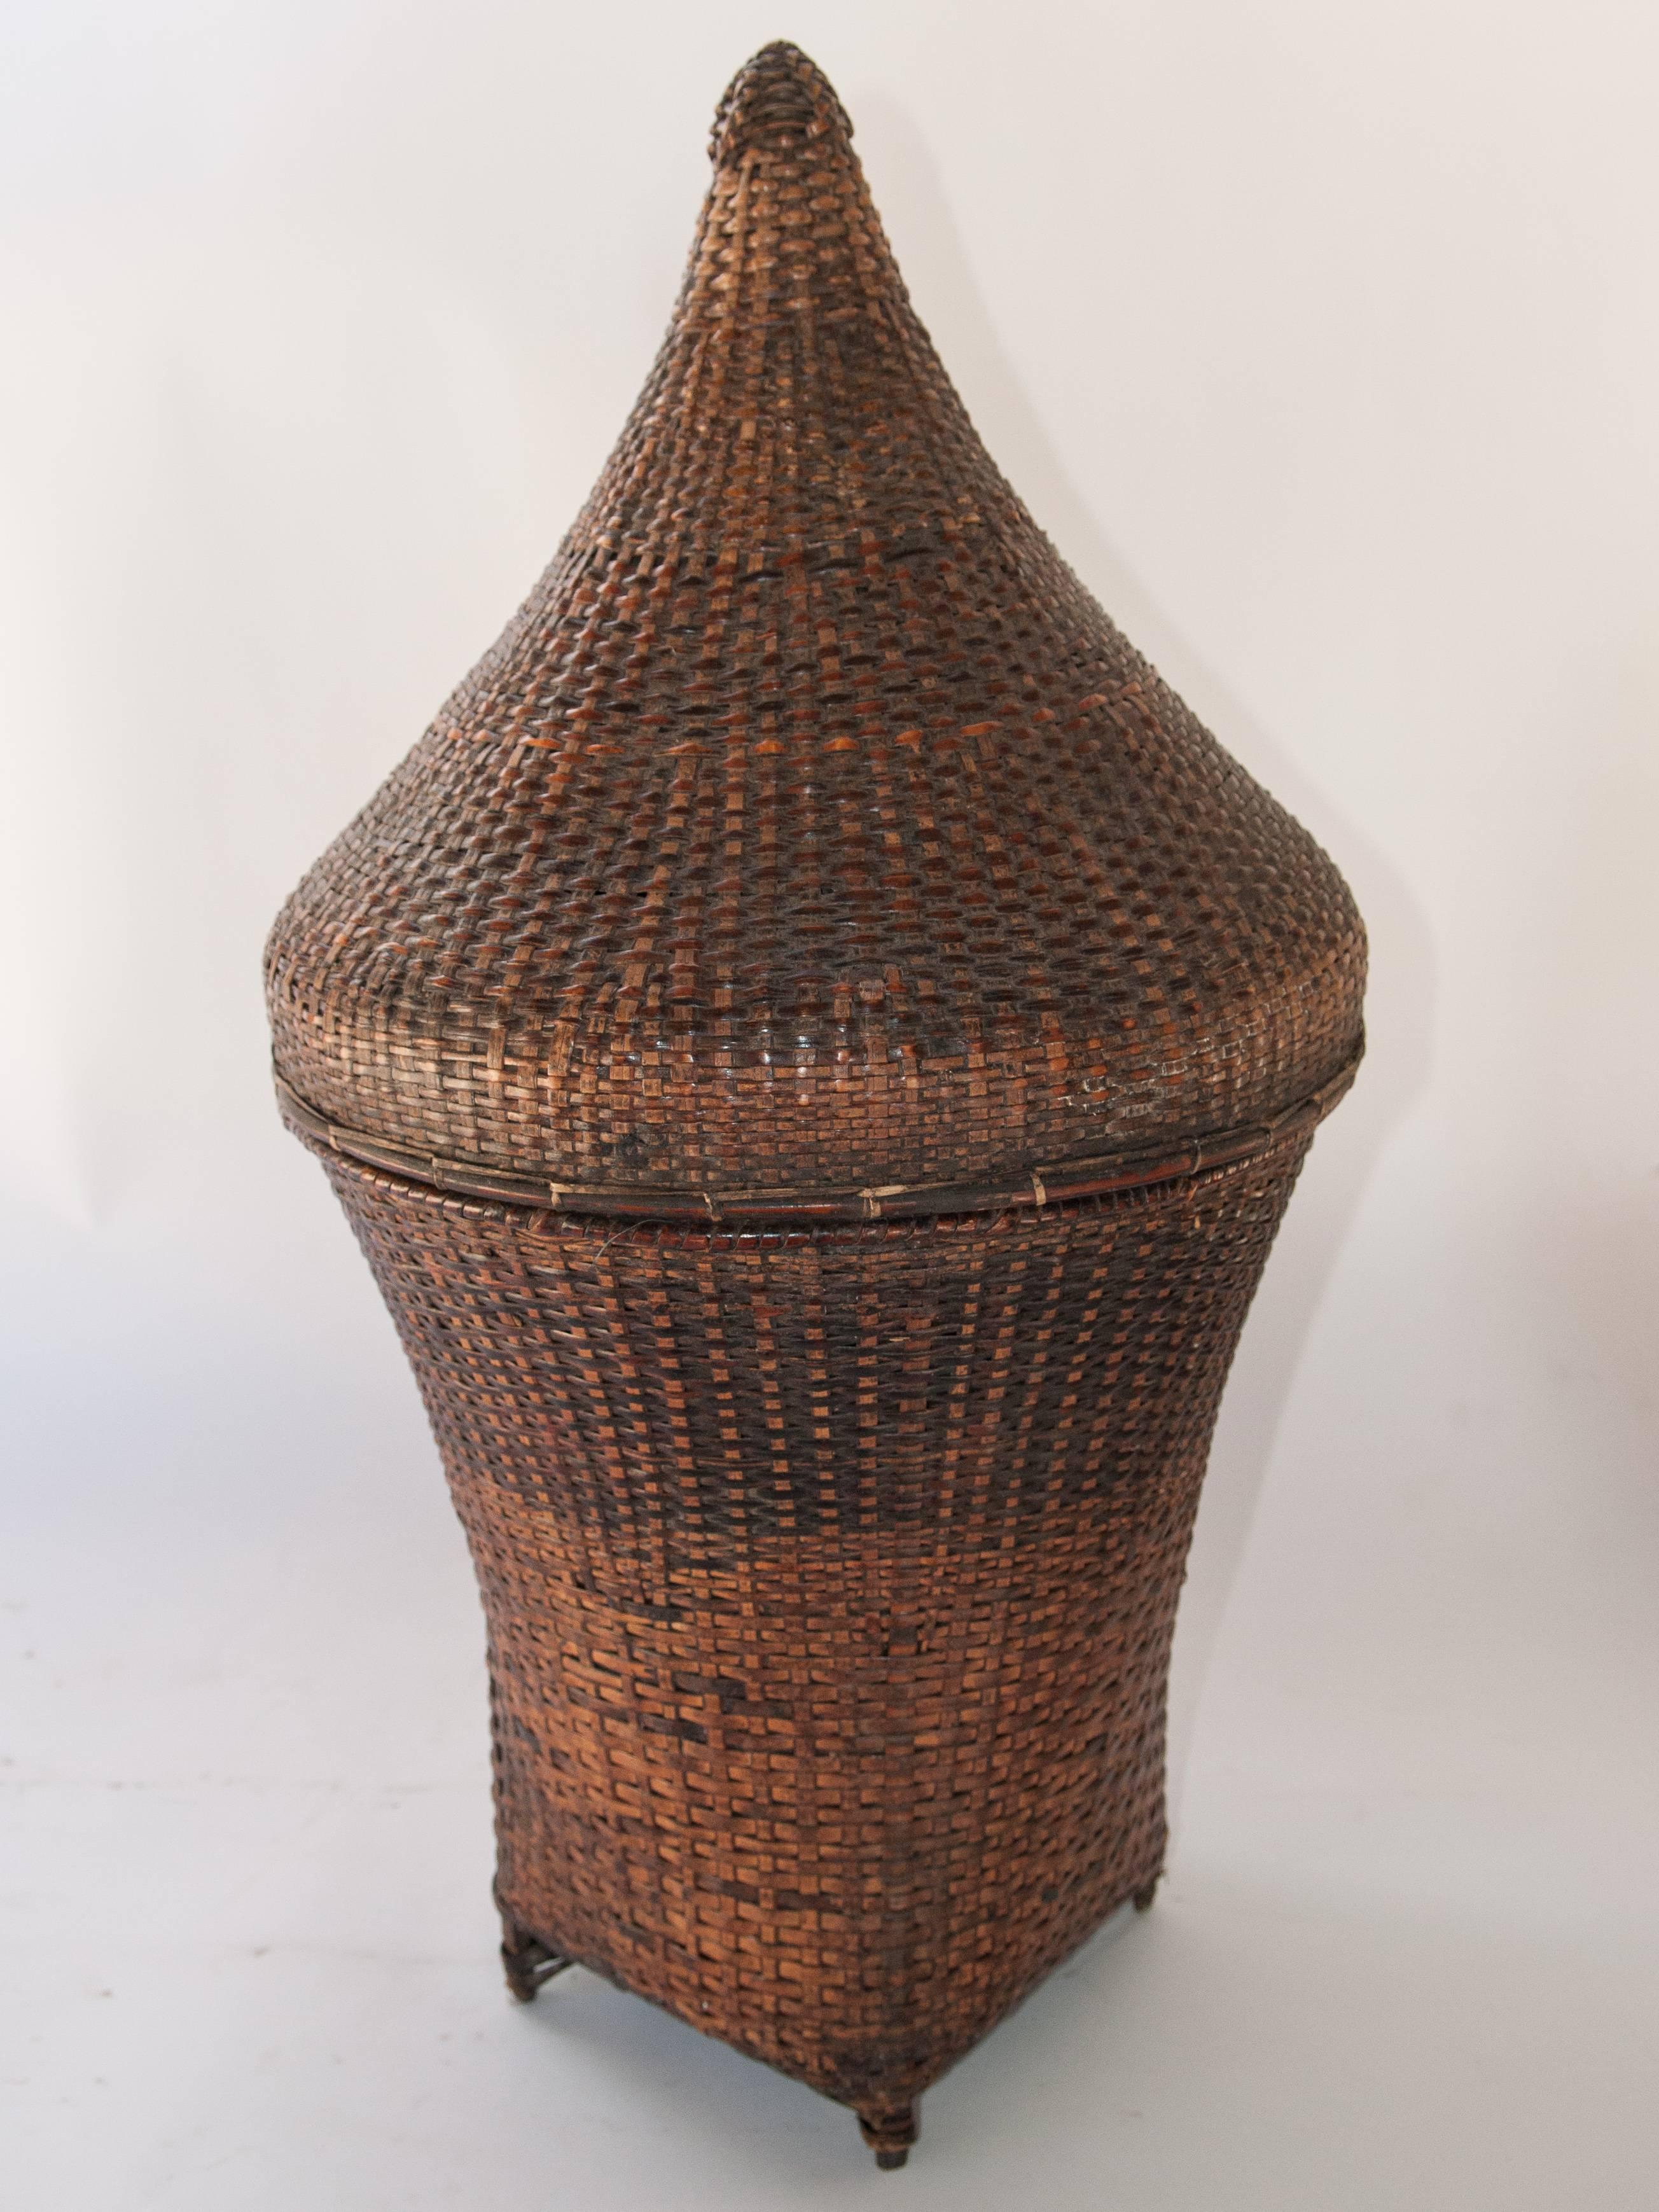 Lidded handwoven storage basket. Chin people of Burma, mid-20th century, bamboo.
Offered by Bruce Hughes.
This footed basket would have been used to transport and store household items - textiles and other valuables. It comes from the Chin or